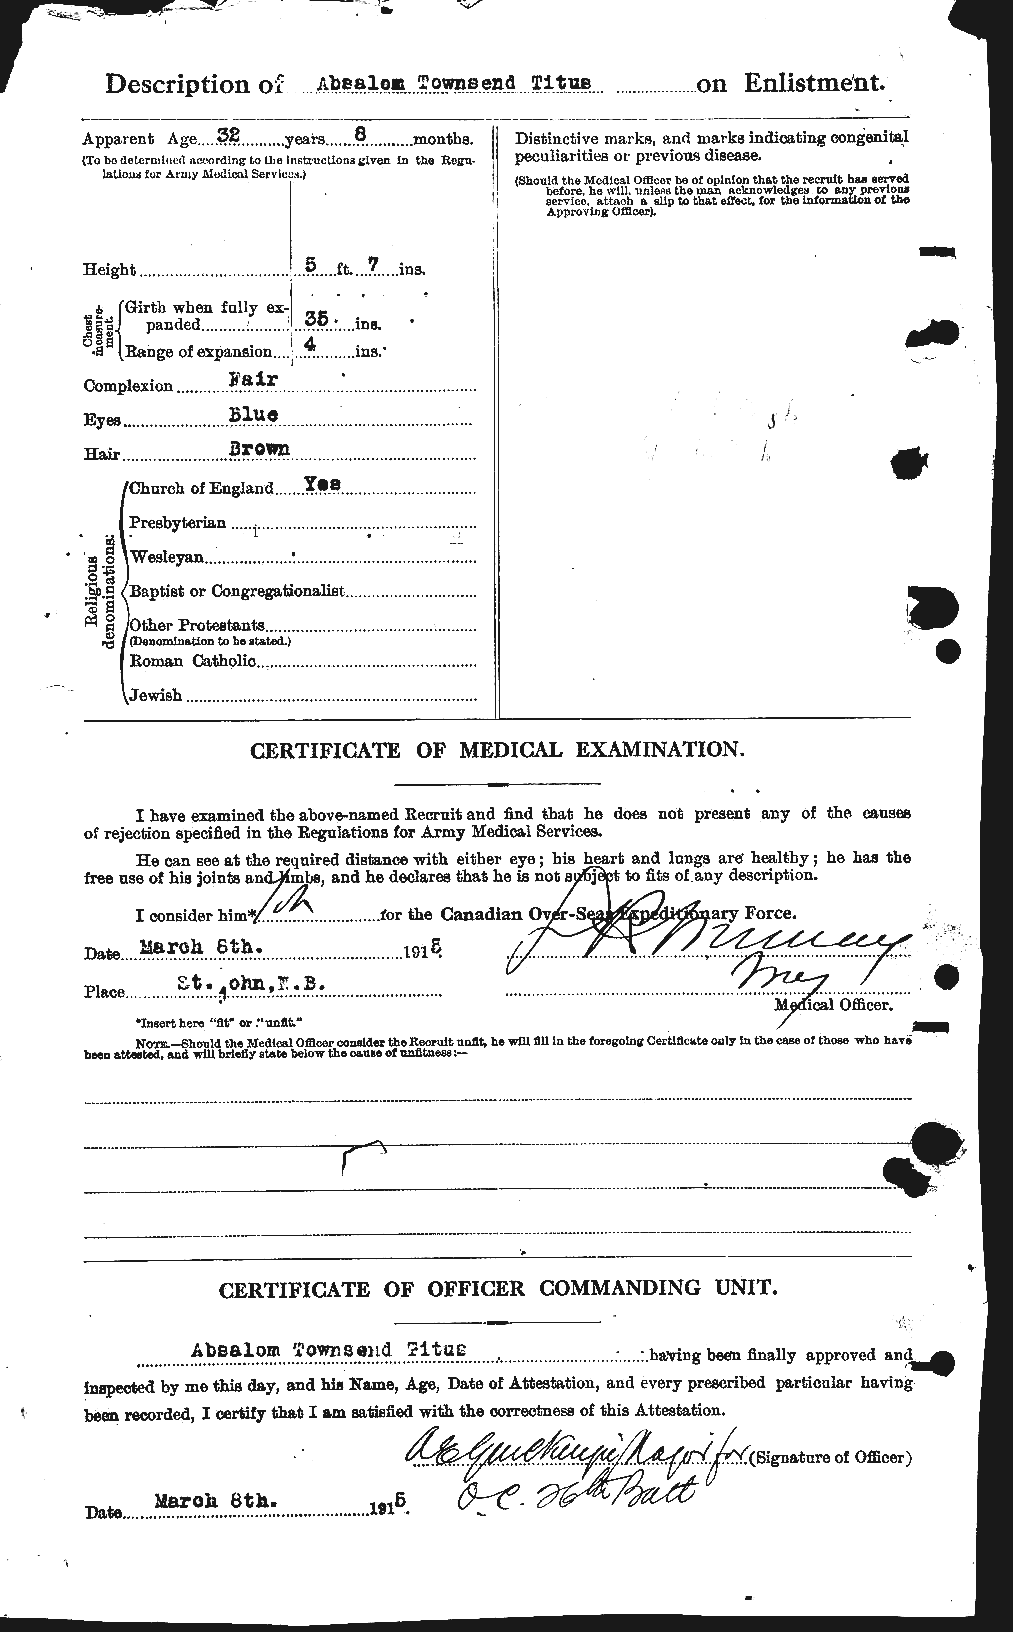 Personnel Records of the First World War - CEF 634947b